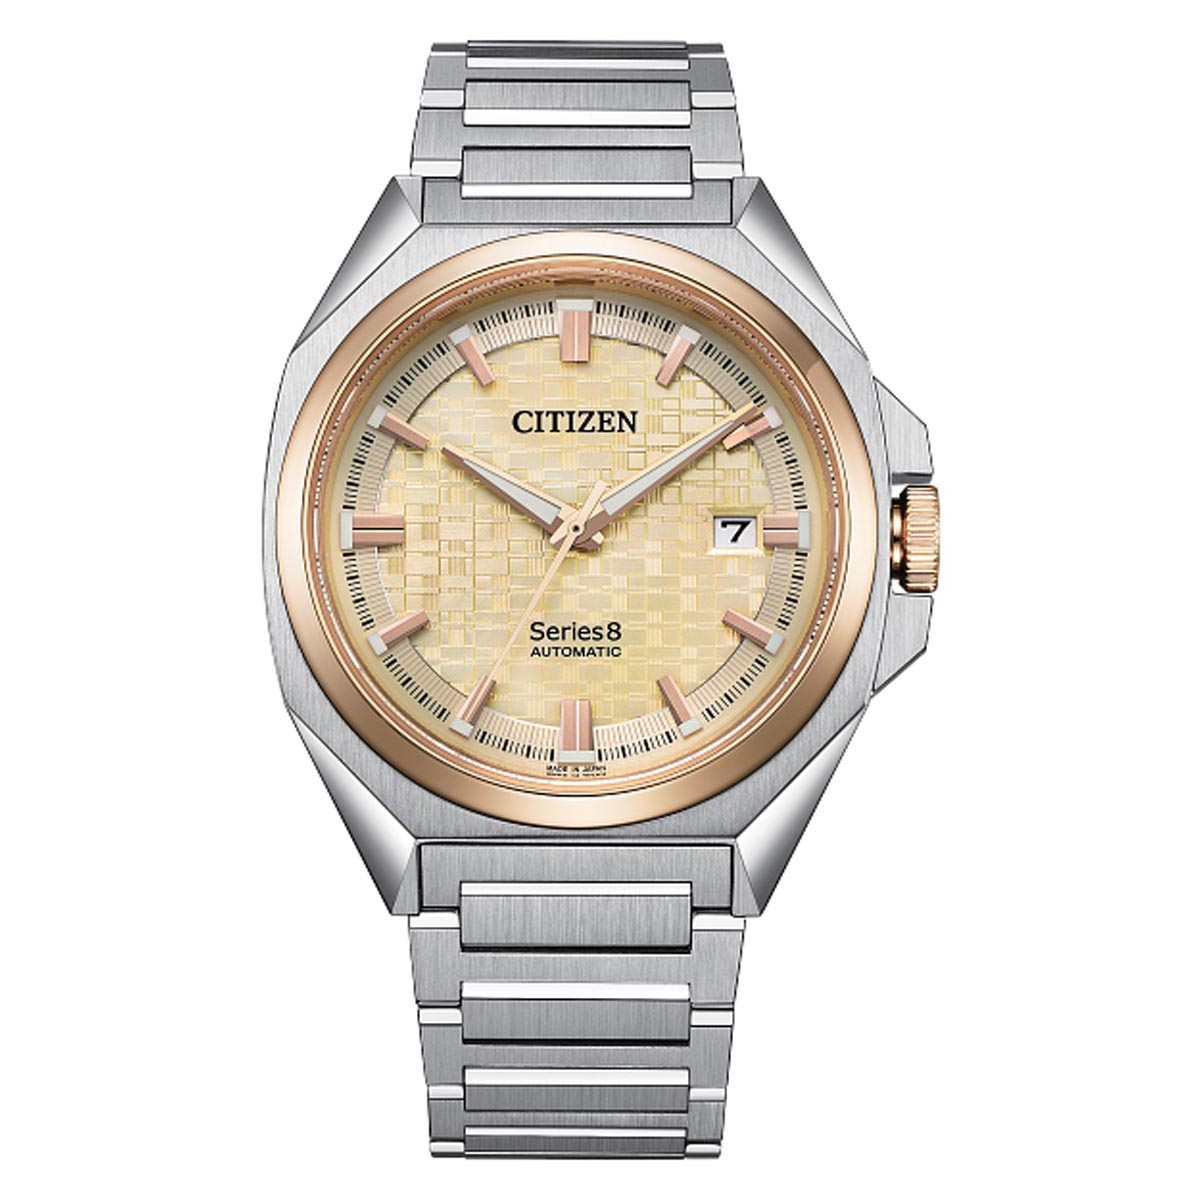 Citizen Series8 831 Mens Watch with Champagne Dial and Stainless Steel Bracelet (automatic movement)